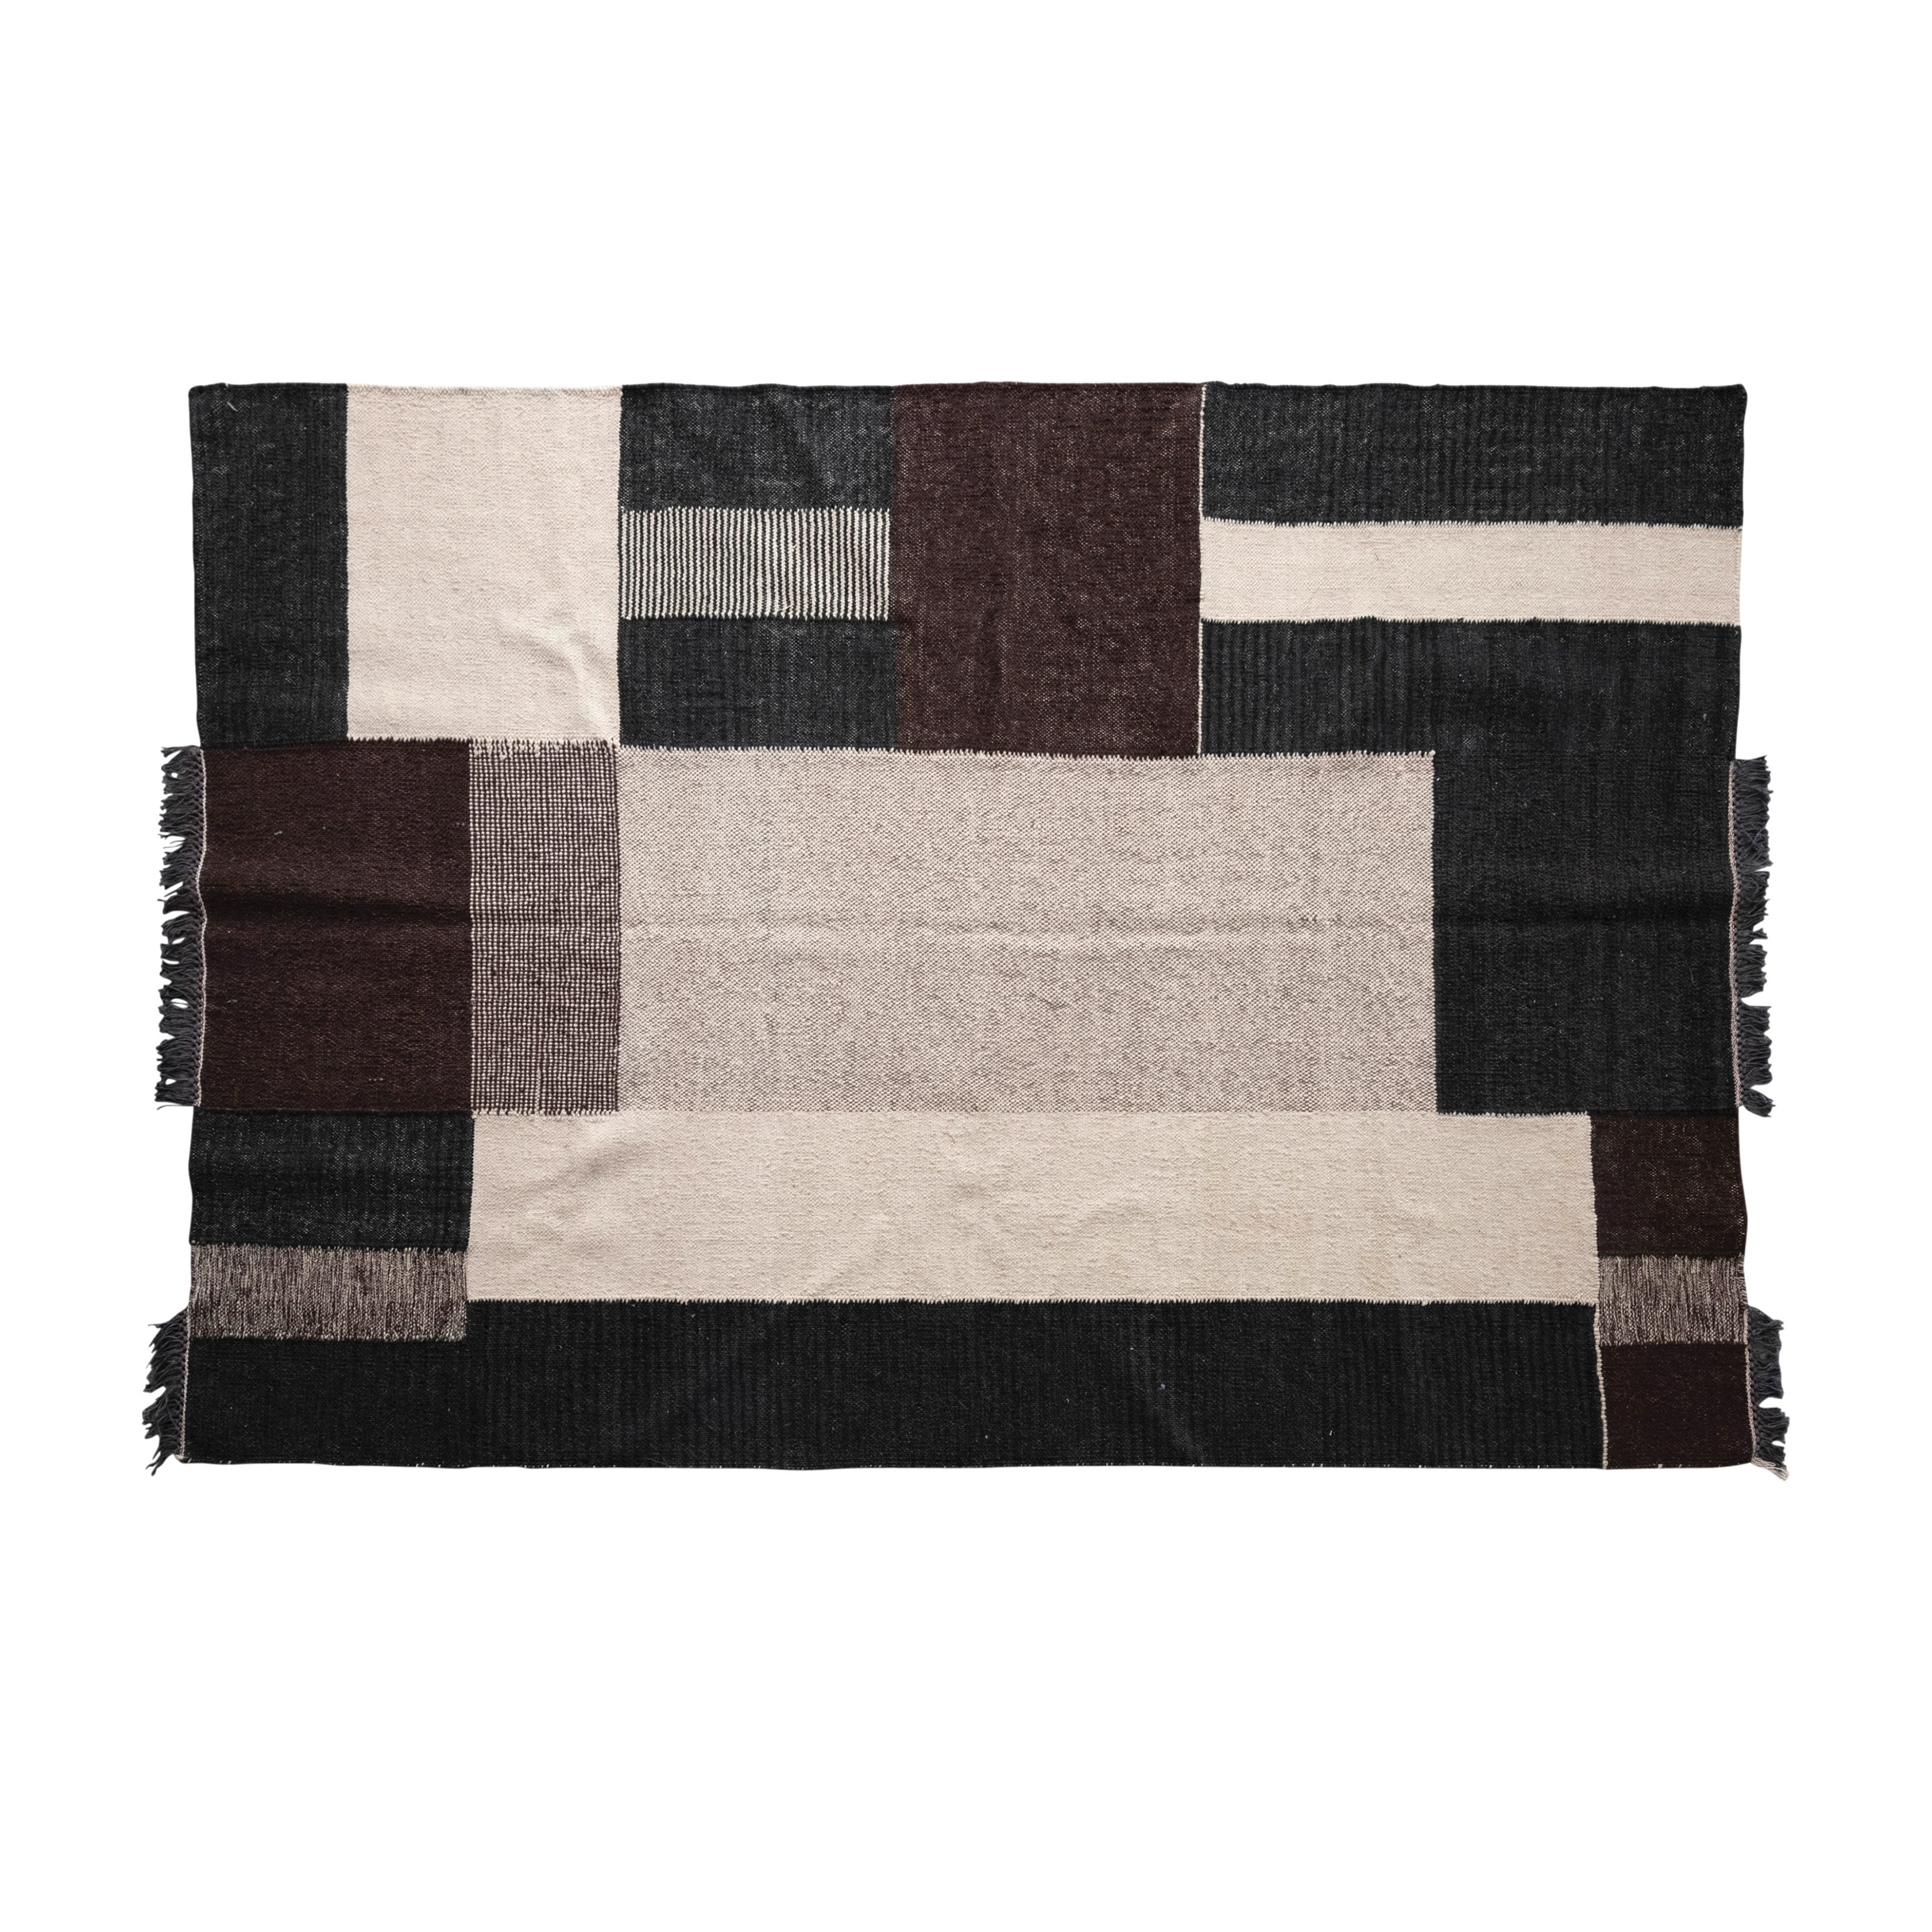 Woven Wool & Cotton Rug w/ Color Block Design